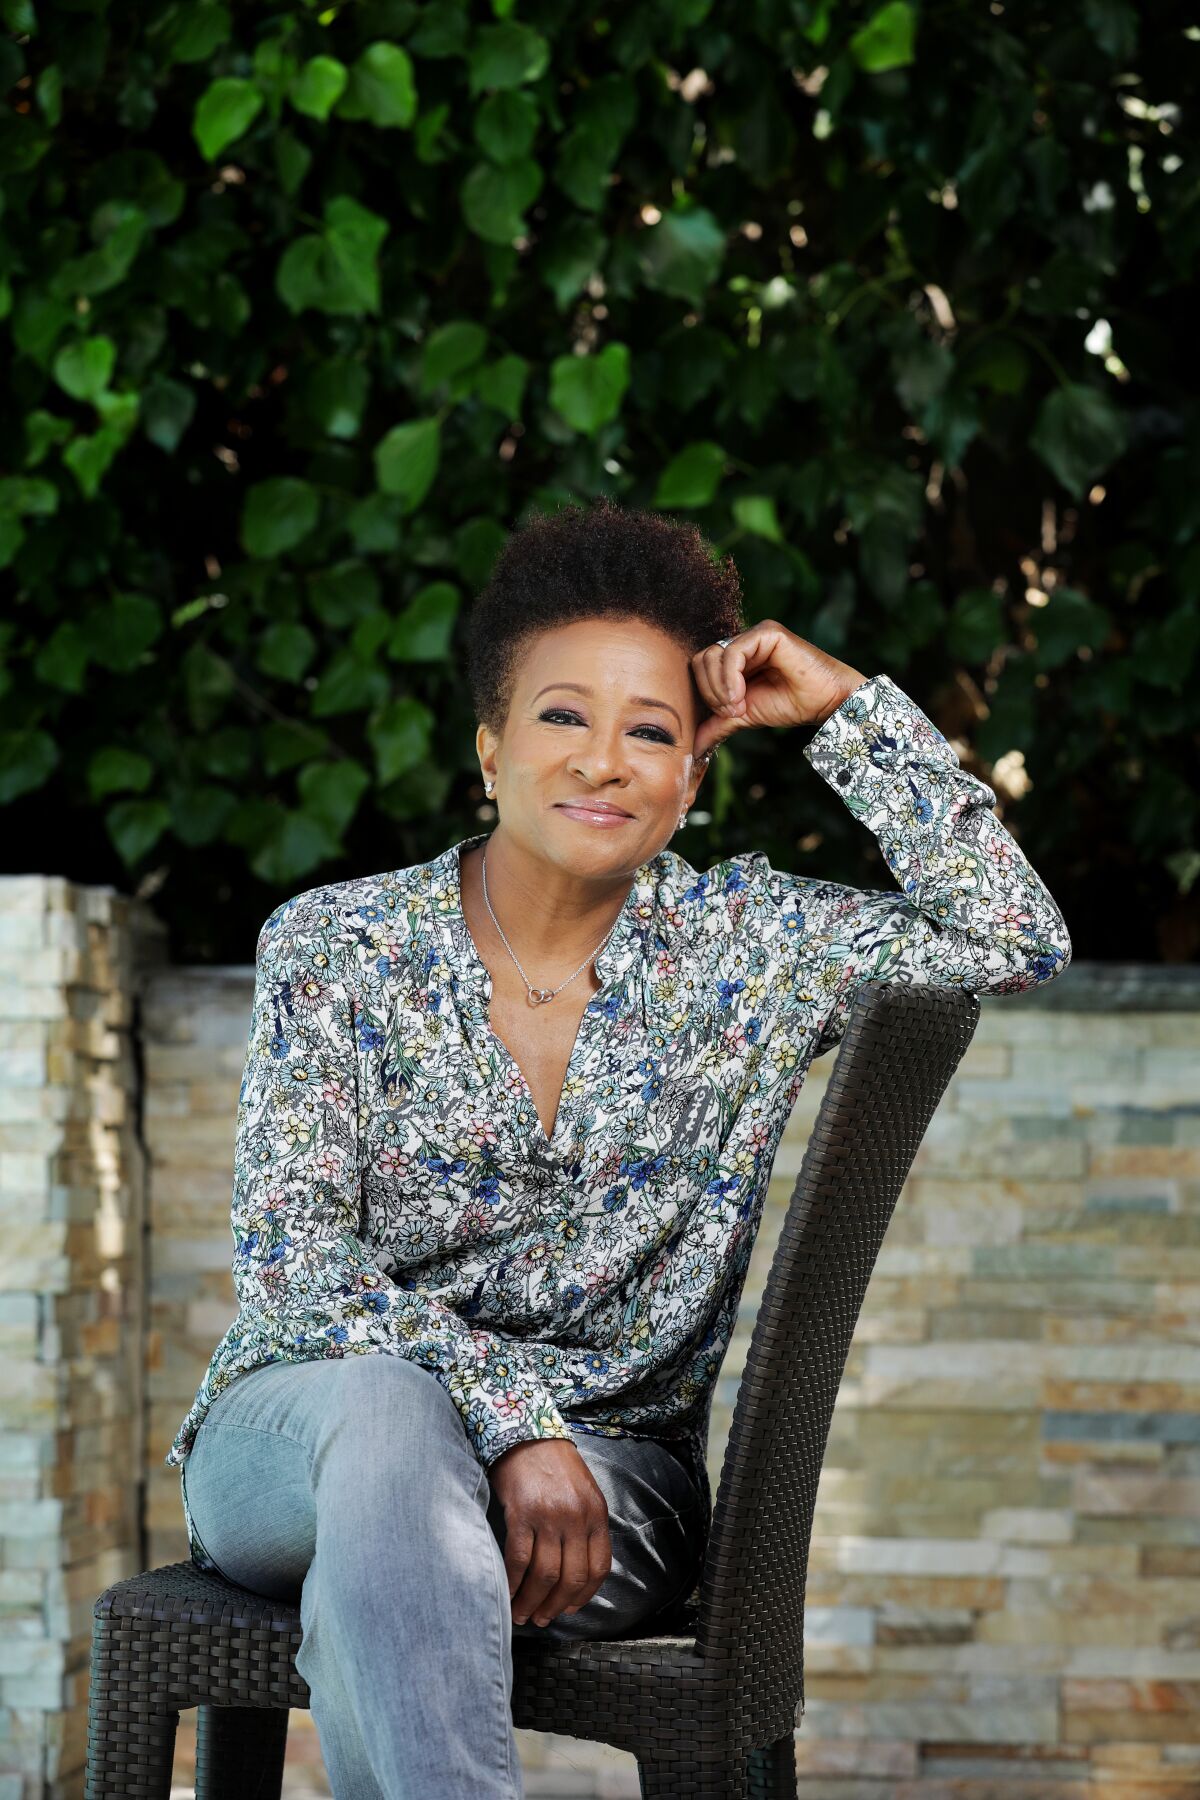 Actress Wanda Sykes of "The Upshaws" sits sideways on a chair with her legs crossed.